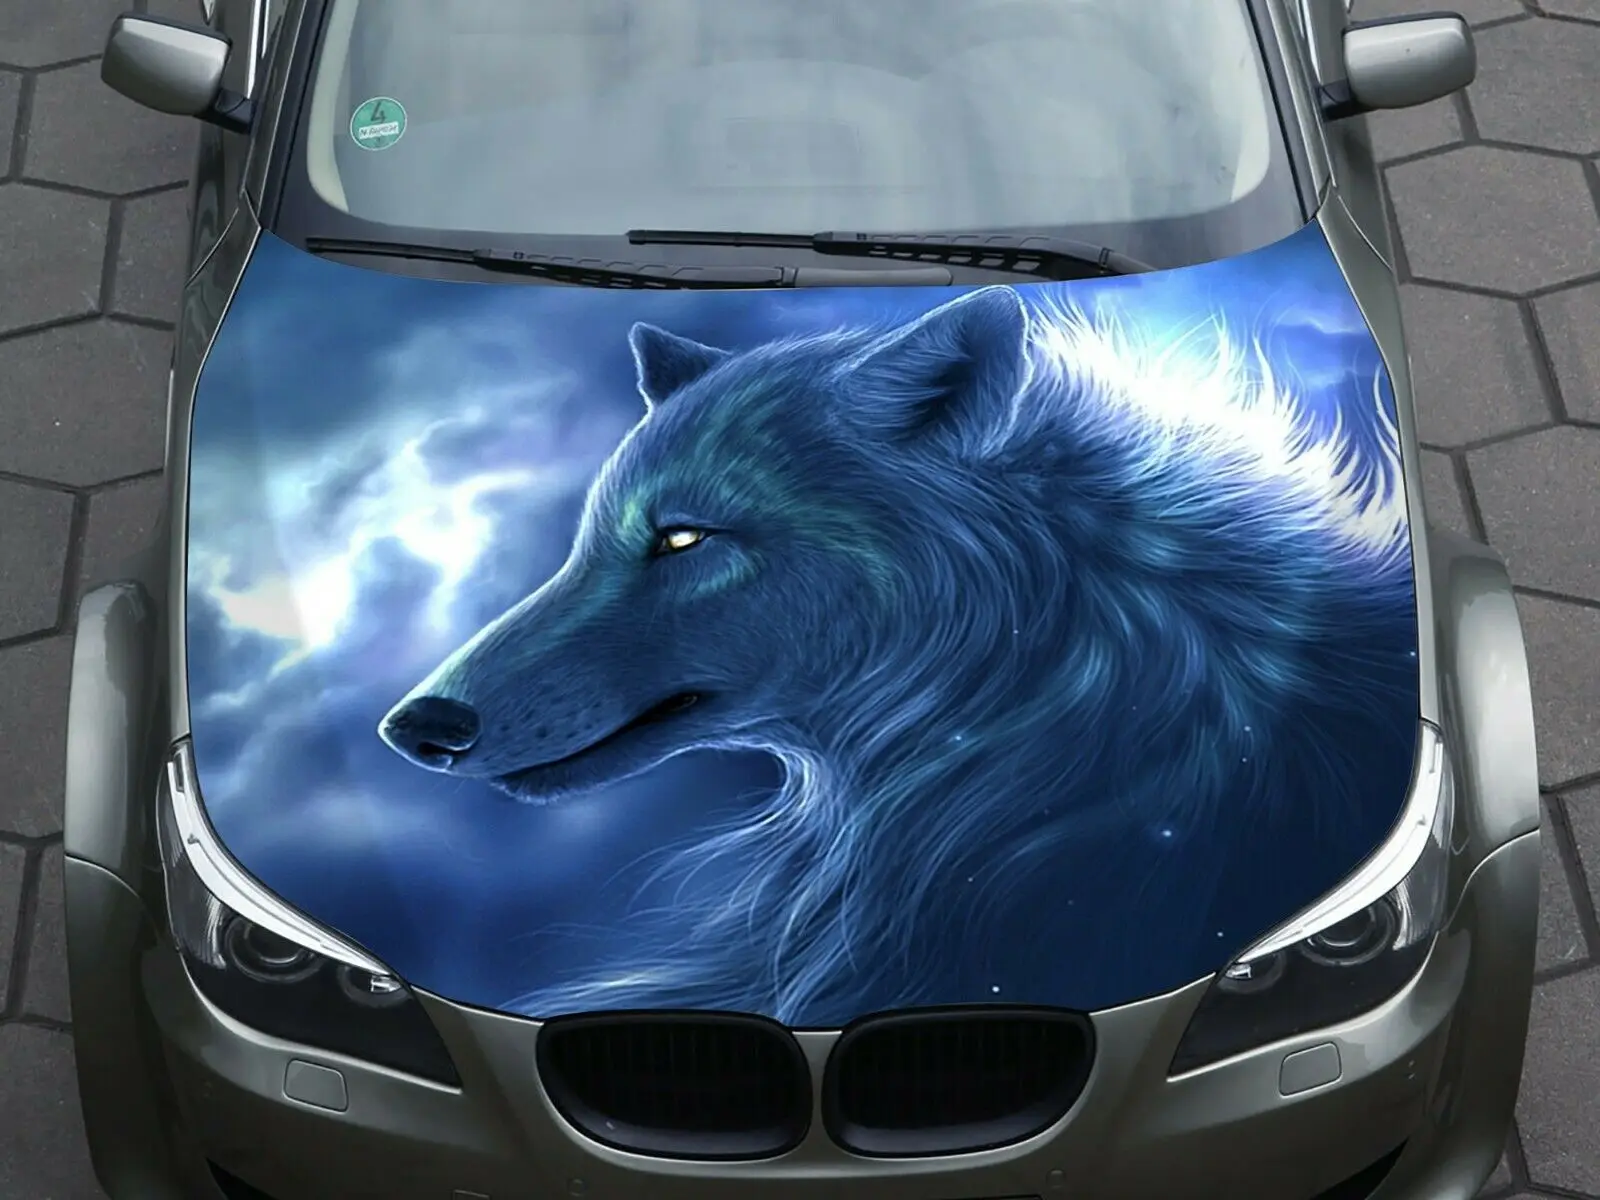 

Wolf Car Hood Wrap Decal Vinyl Sticker Full Color Graphic Fit Any Car Art